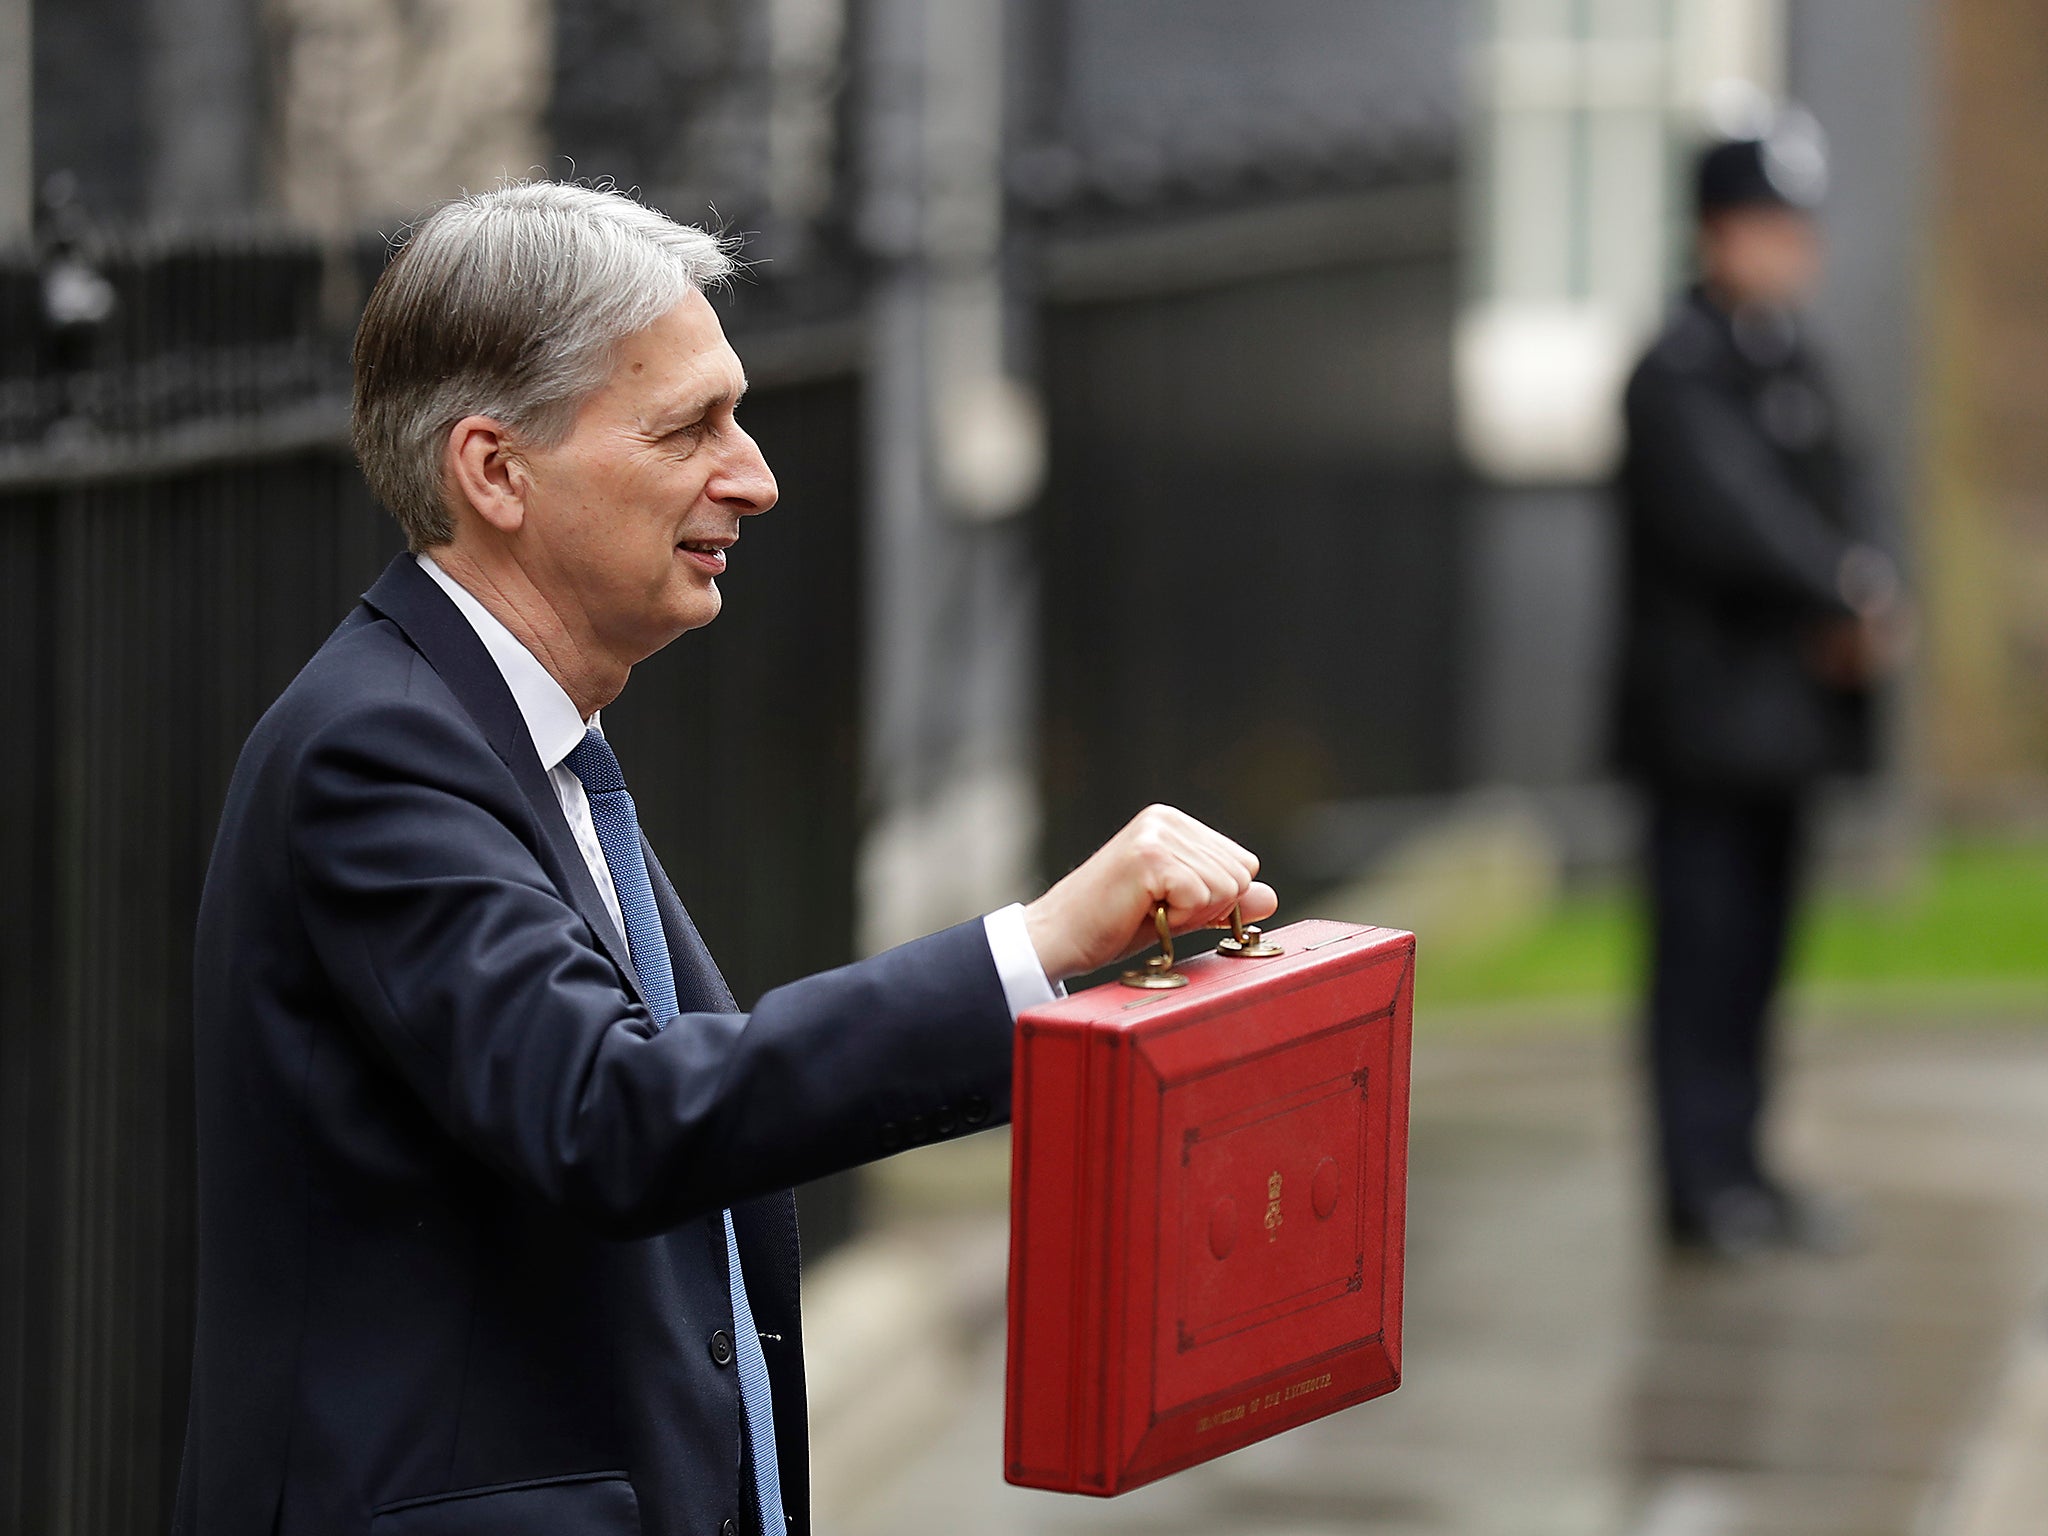 &#13;
Philip Hammond has a reputation for being a bit on the bland side?&#13;